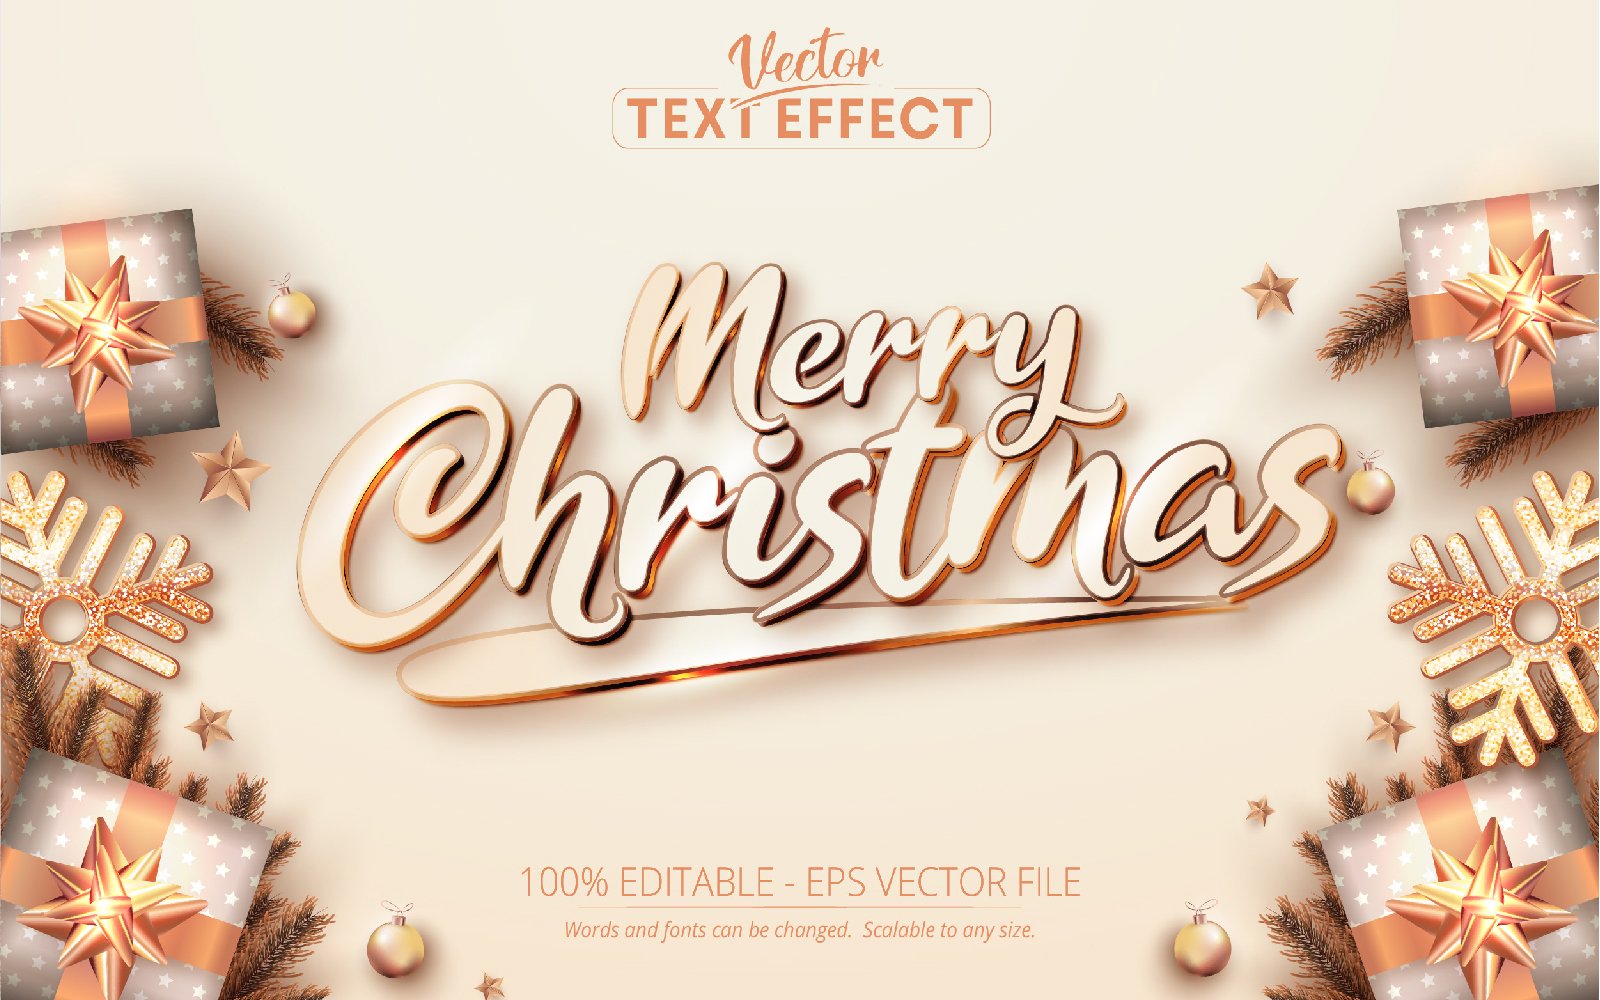 Merry Christmas - Editable Text Effect, Luxury Rose Gold Font Style, Graphics Illustration